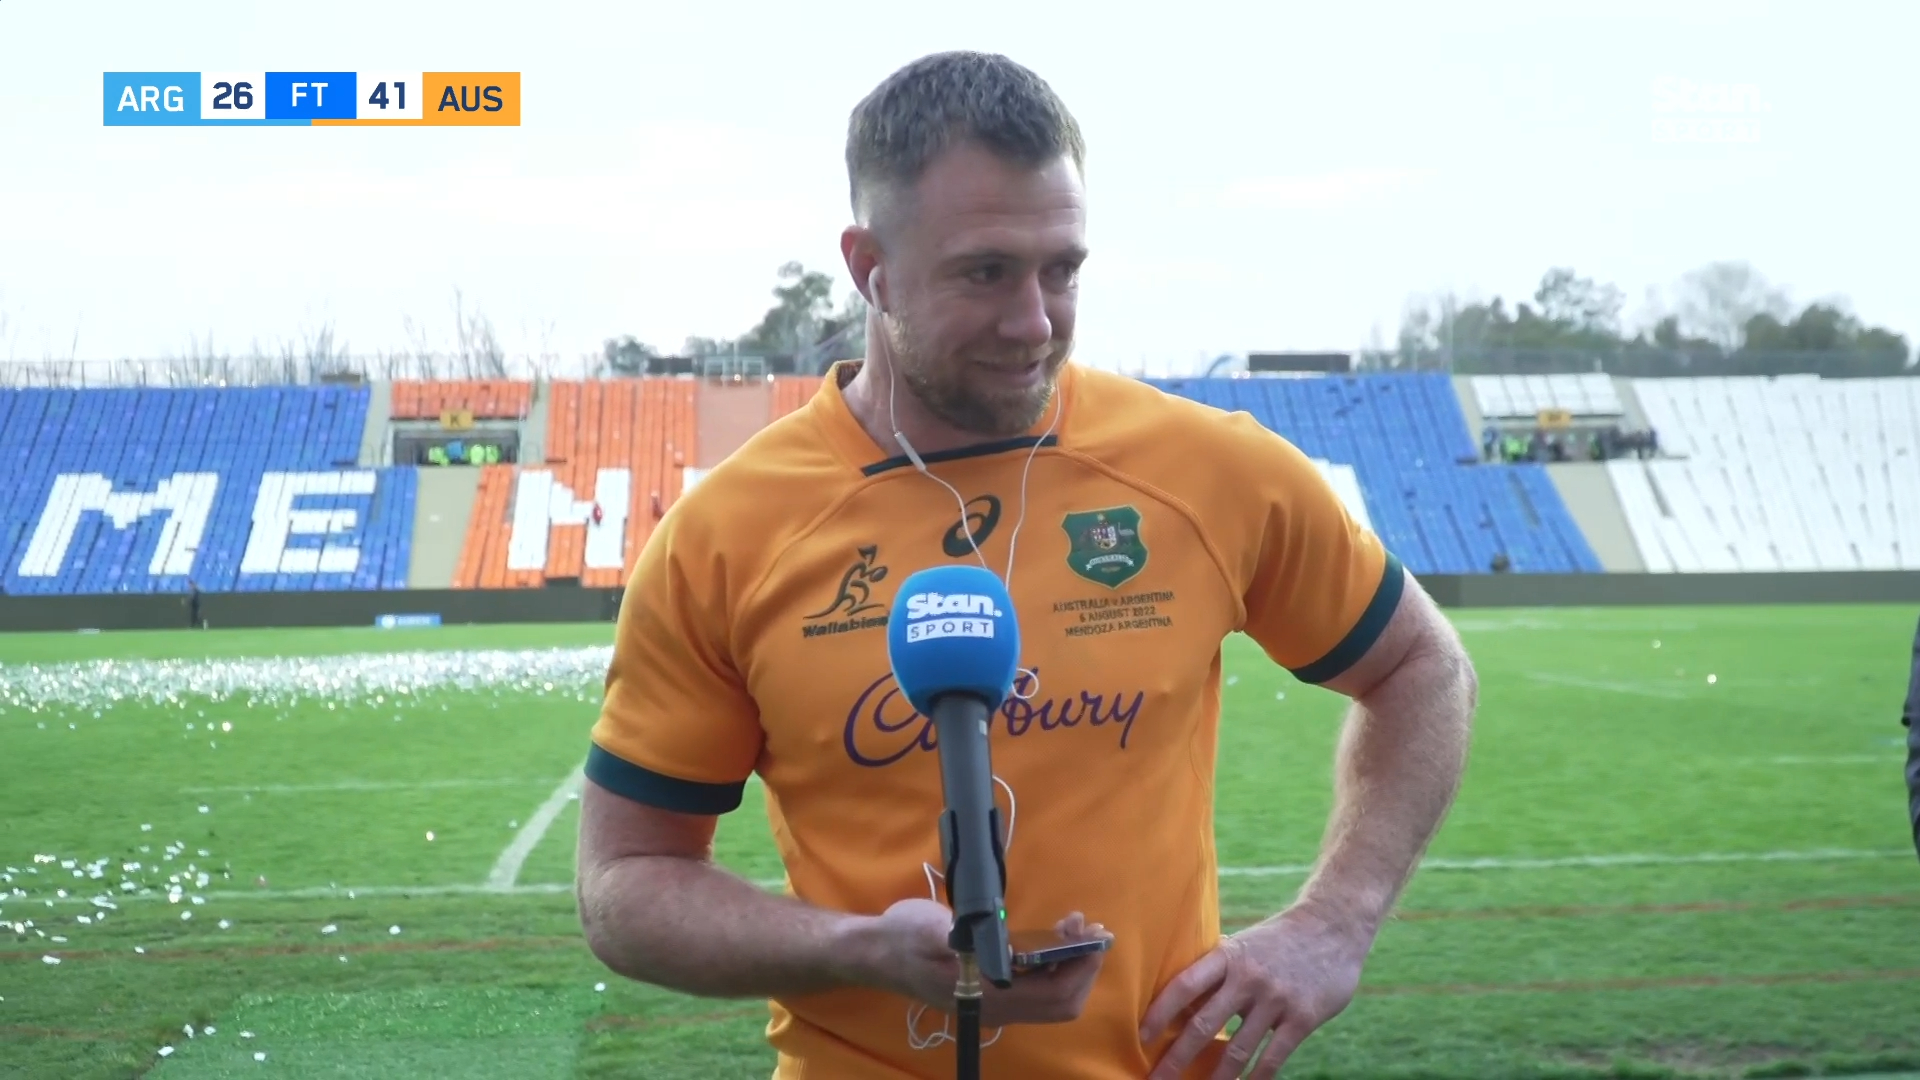 Wallaby tears up after debut